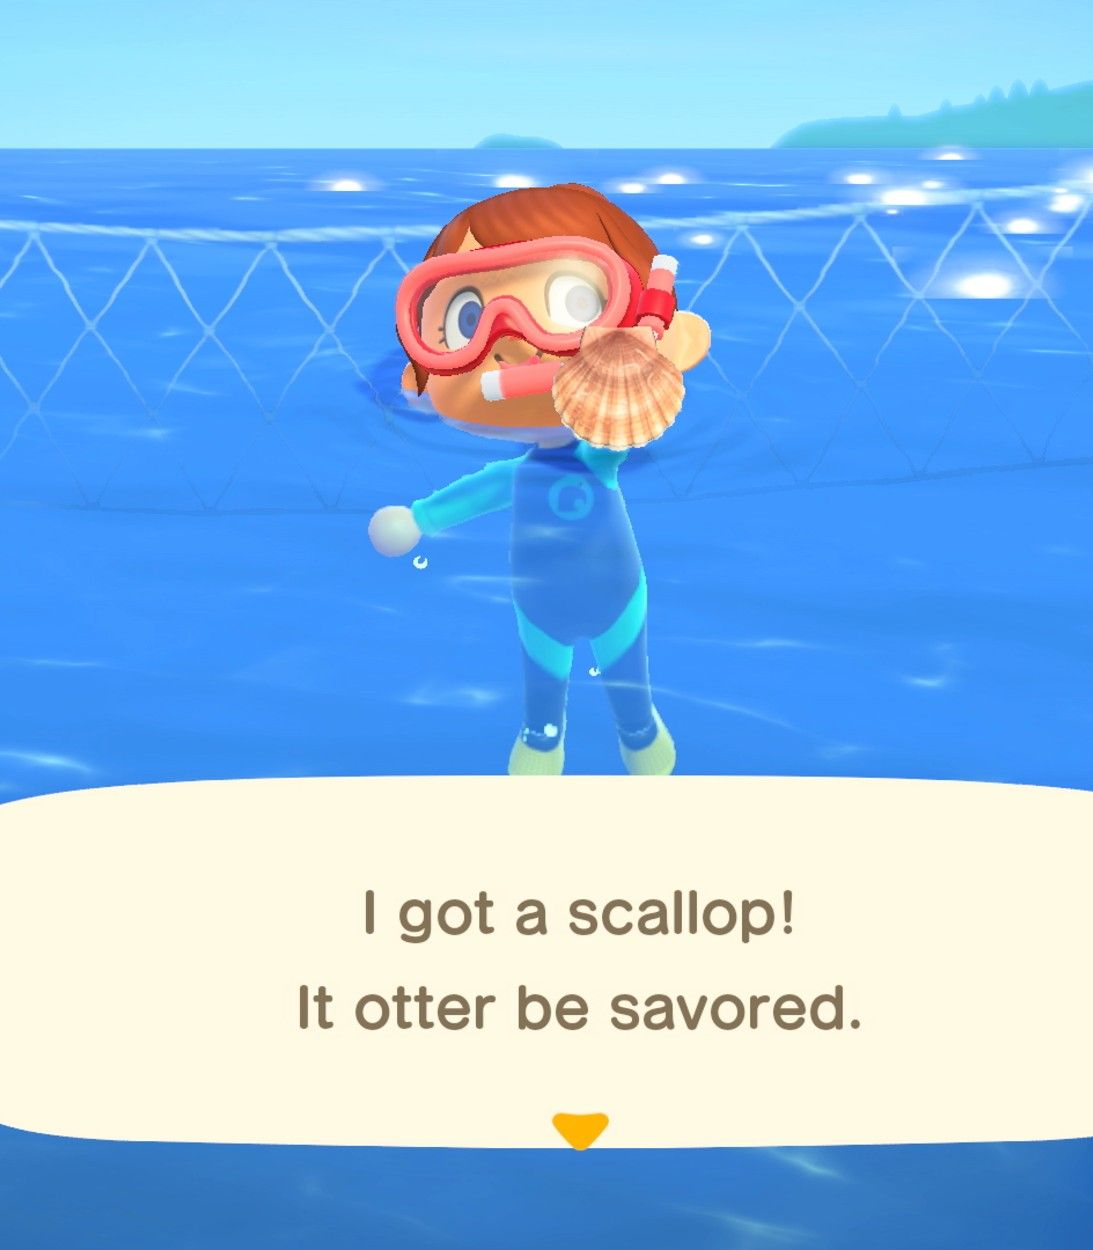 The Giant Isopod in Animal Crossing: New Horizons is one of the fast sea creatures that lunges away if a player chases it.